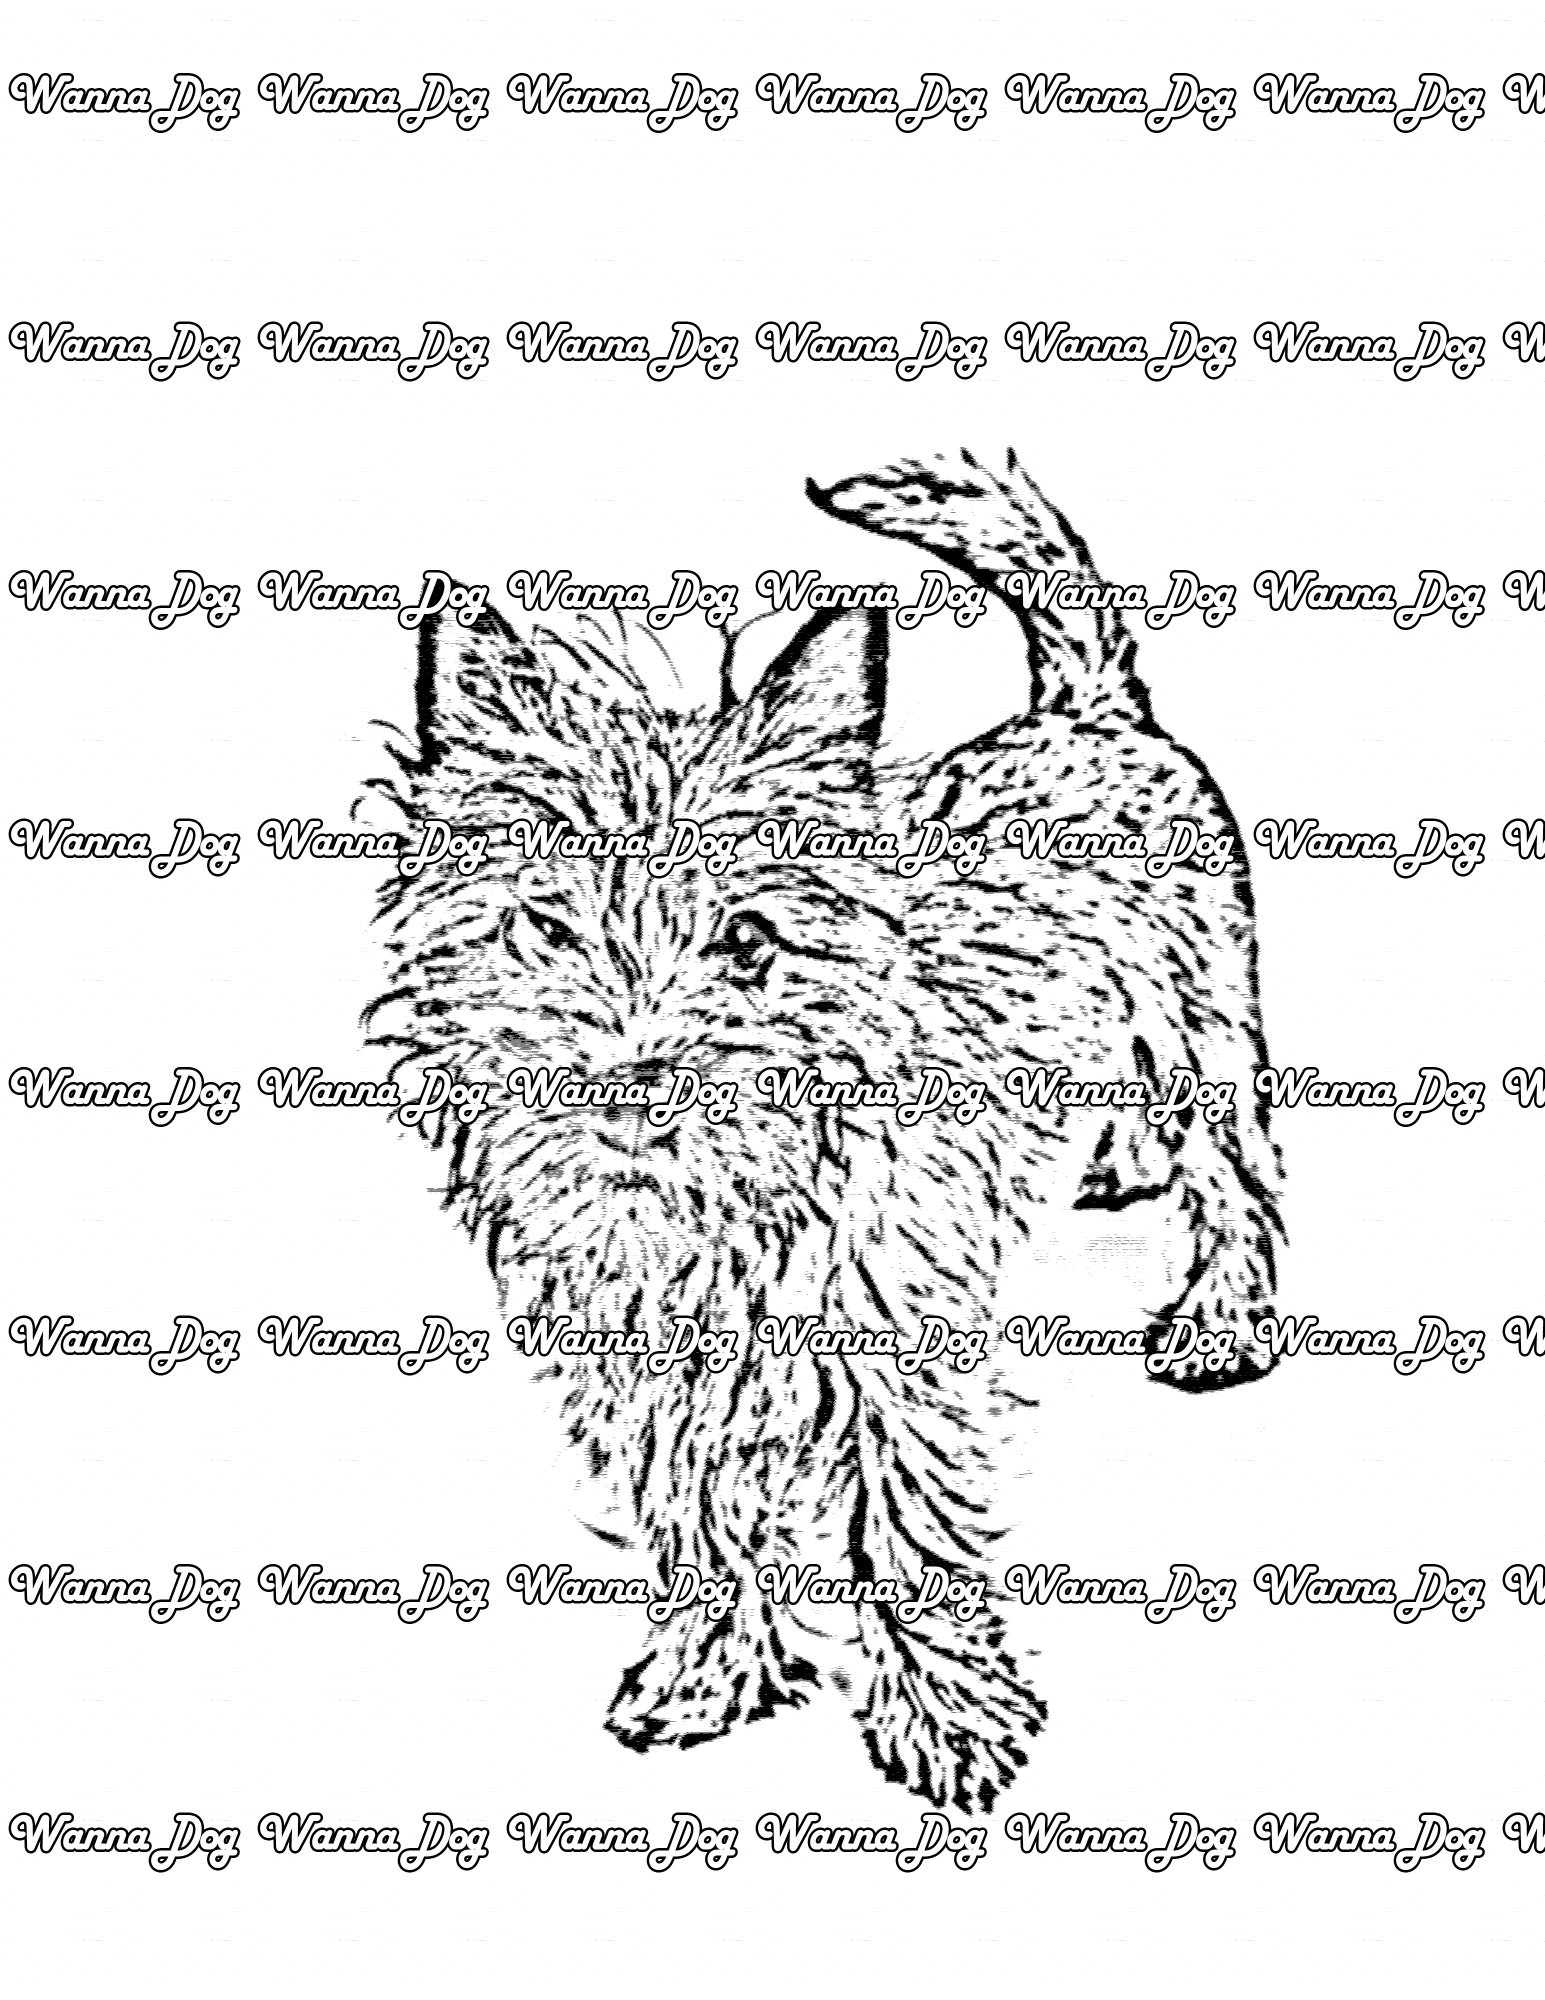 Cairn Terrier Coloring Page of a Cairn Terrier looking up at the camera